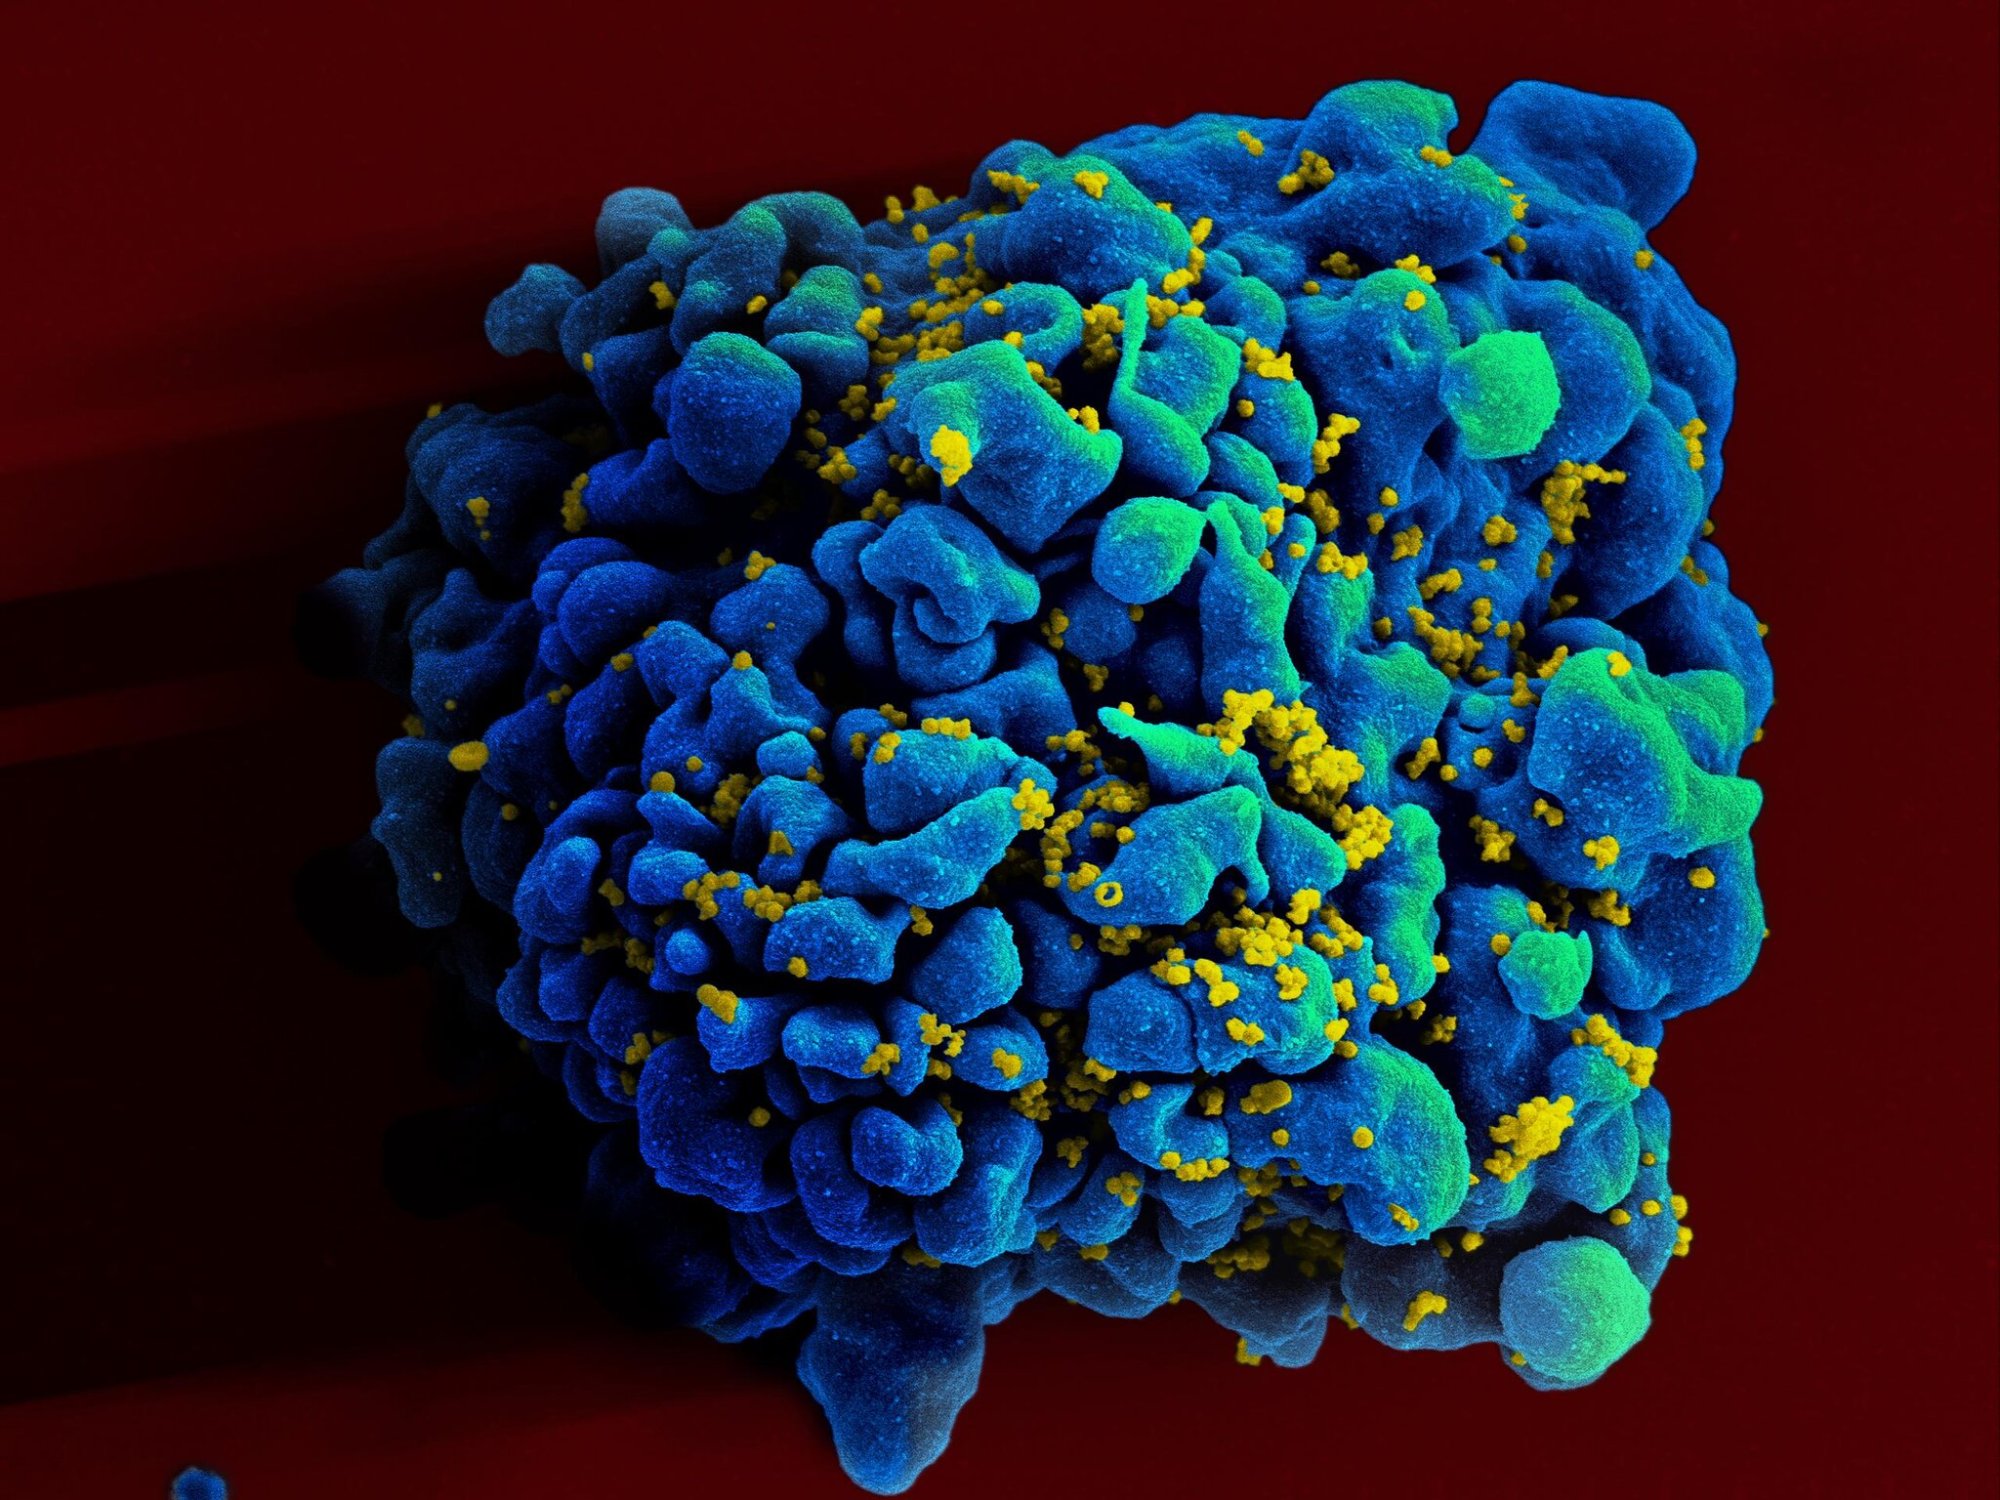 a bumpy cell with specks of yellow, representing hiv